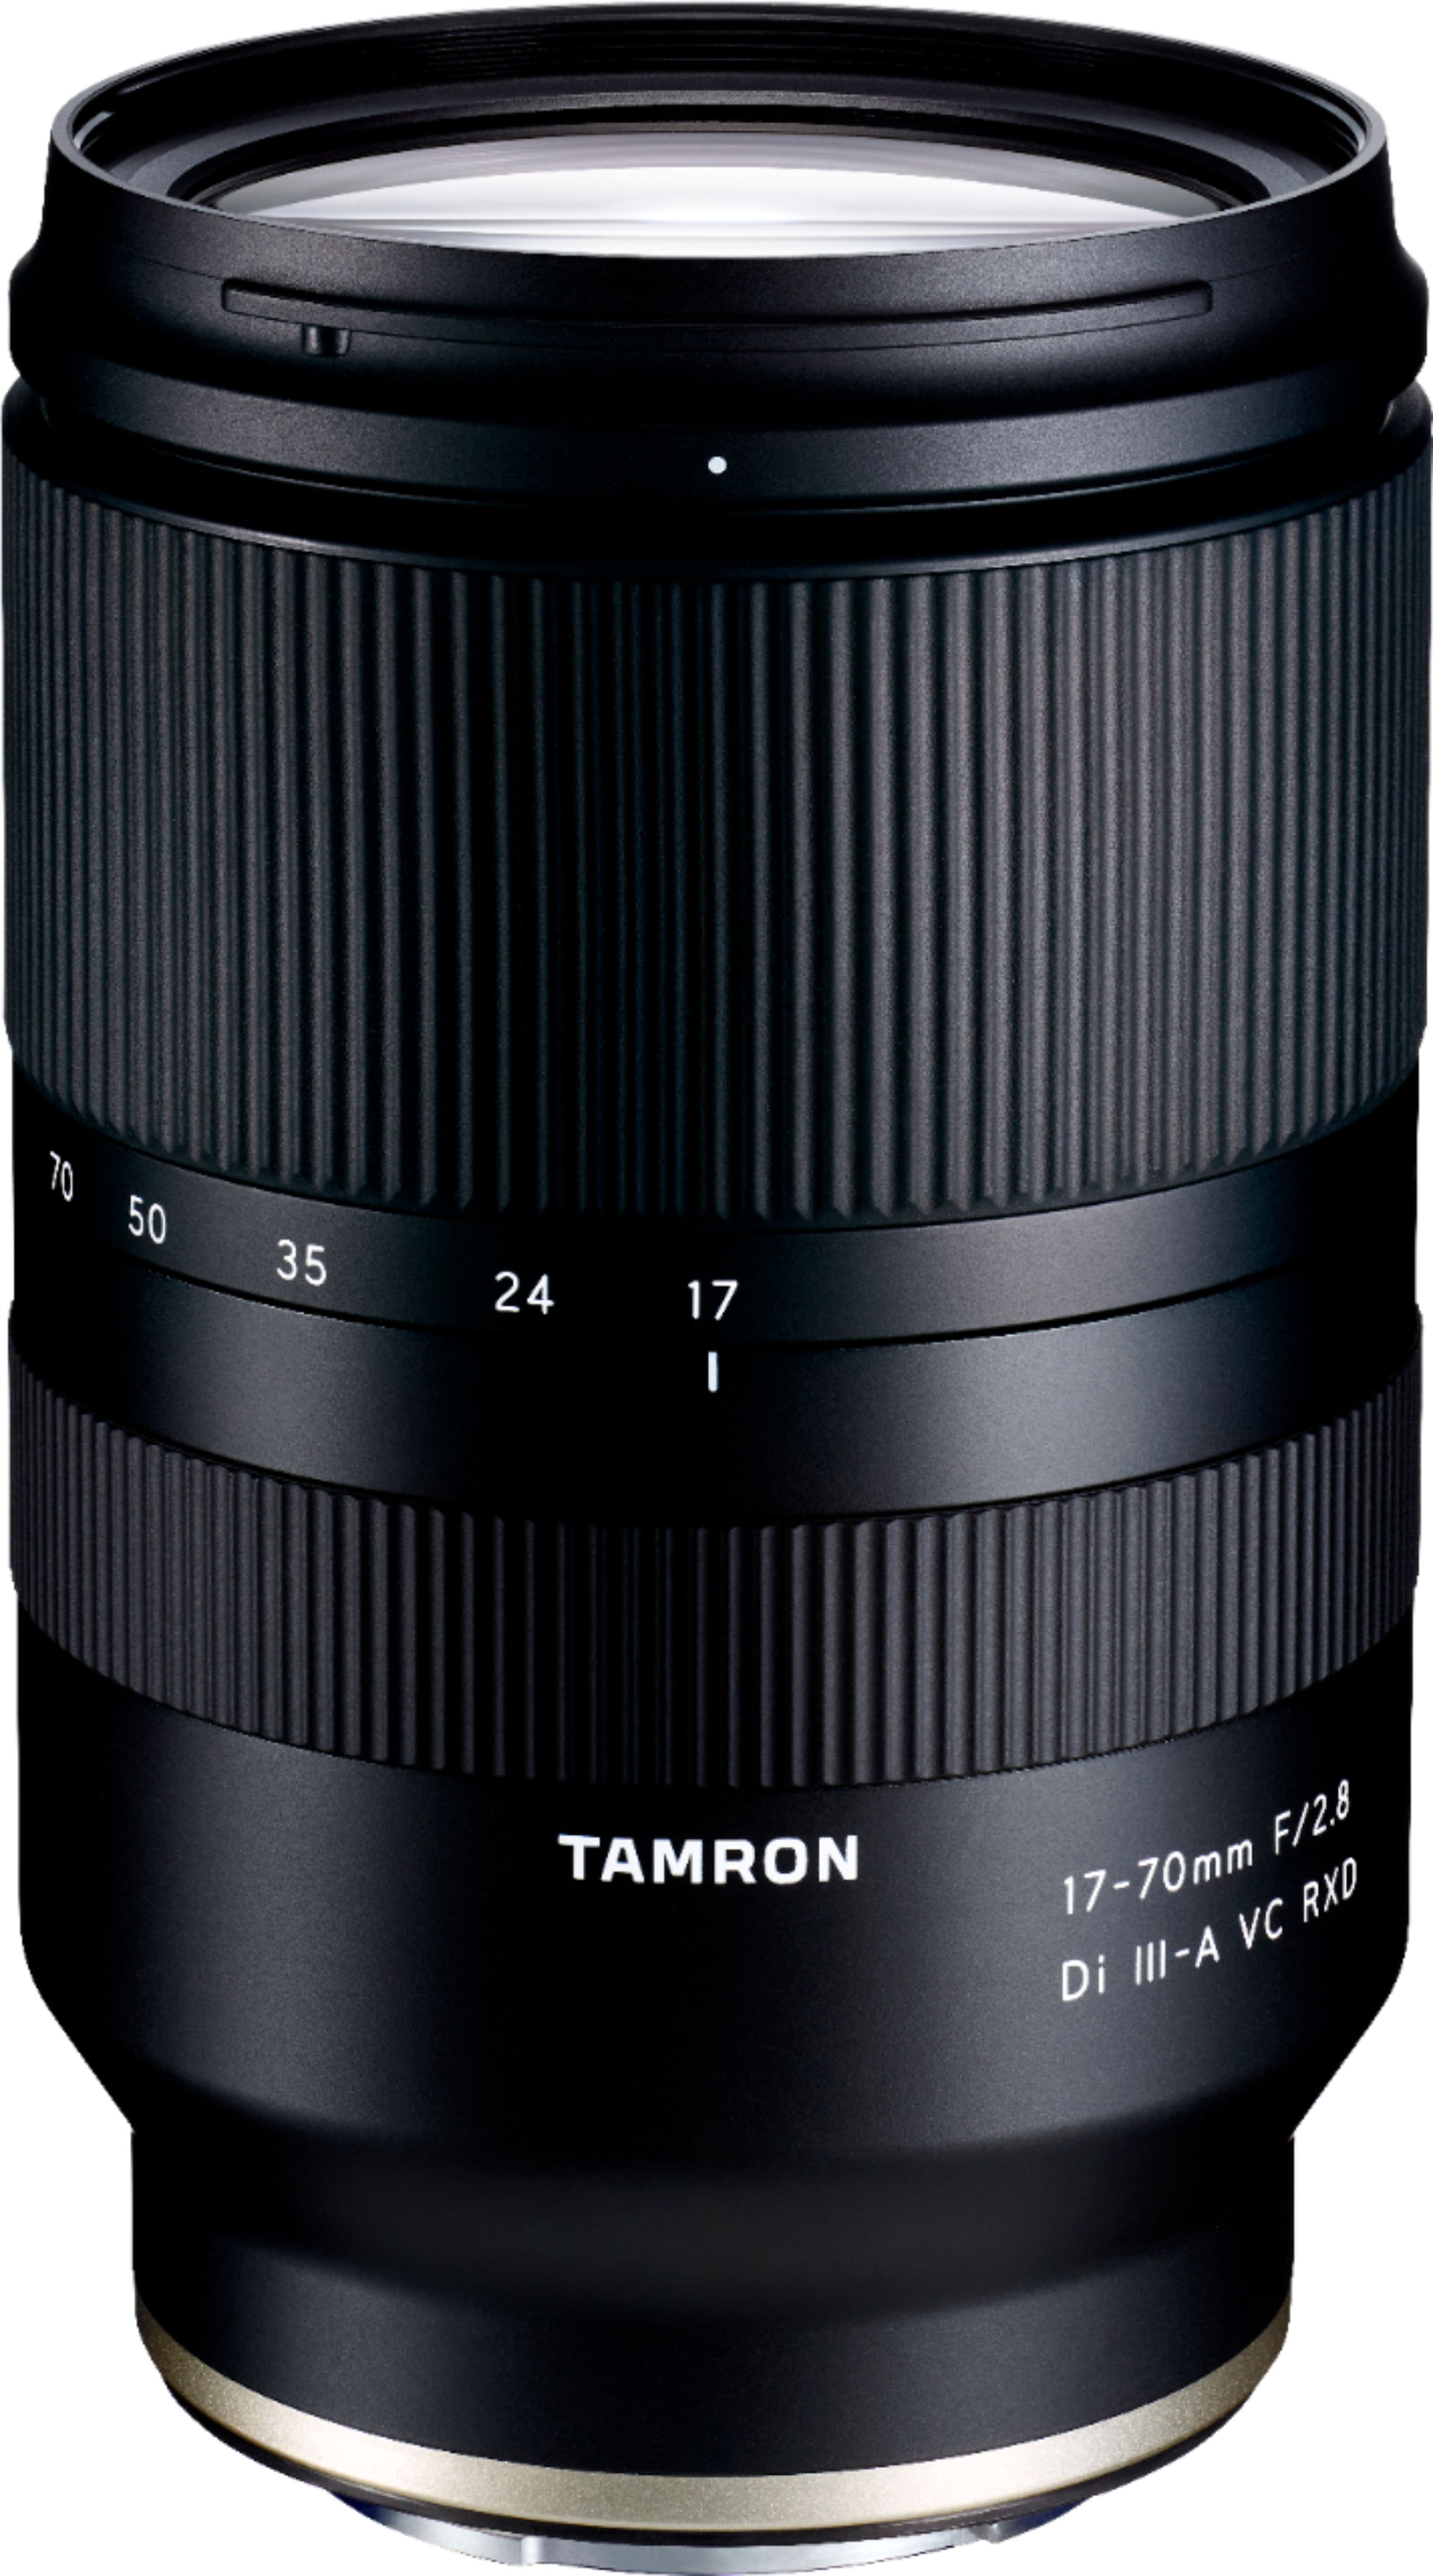 Tamron 17-70mm F/2.8 Di III-A VC RXD Standard Zoom Lens for 